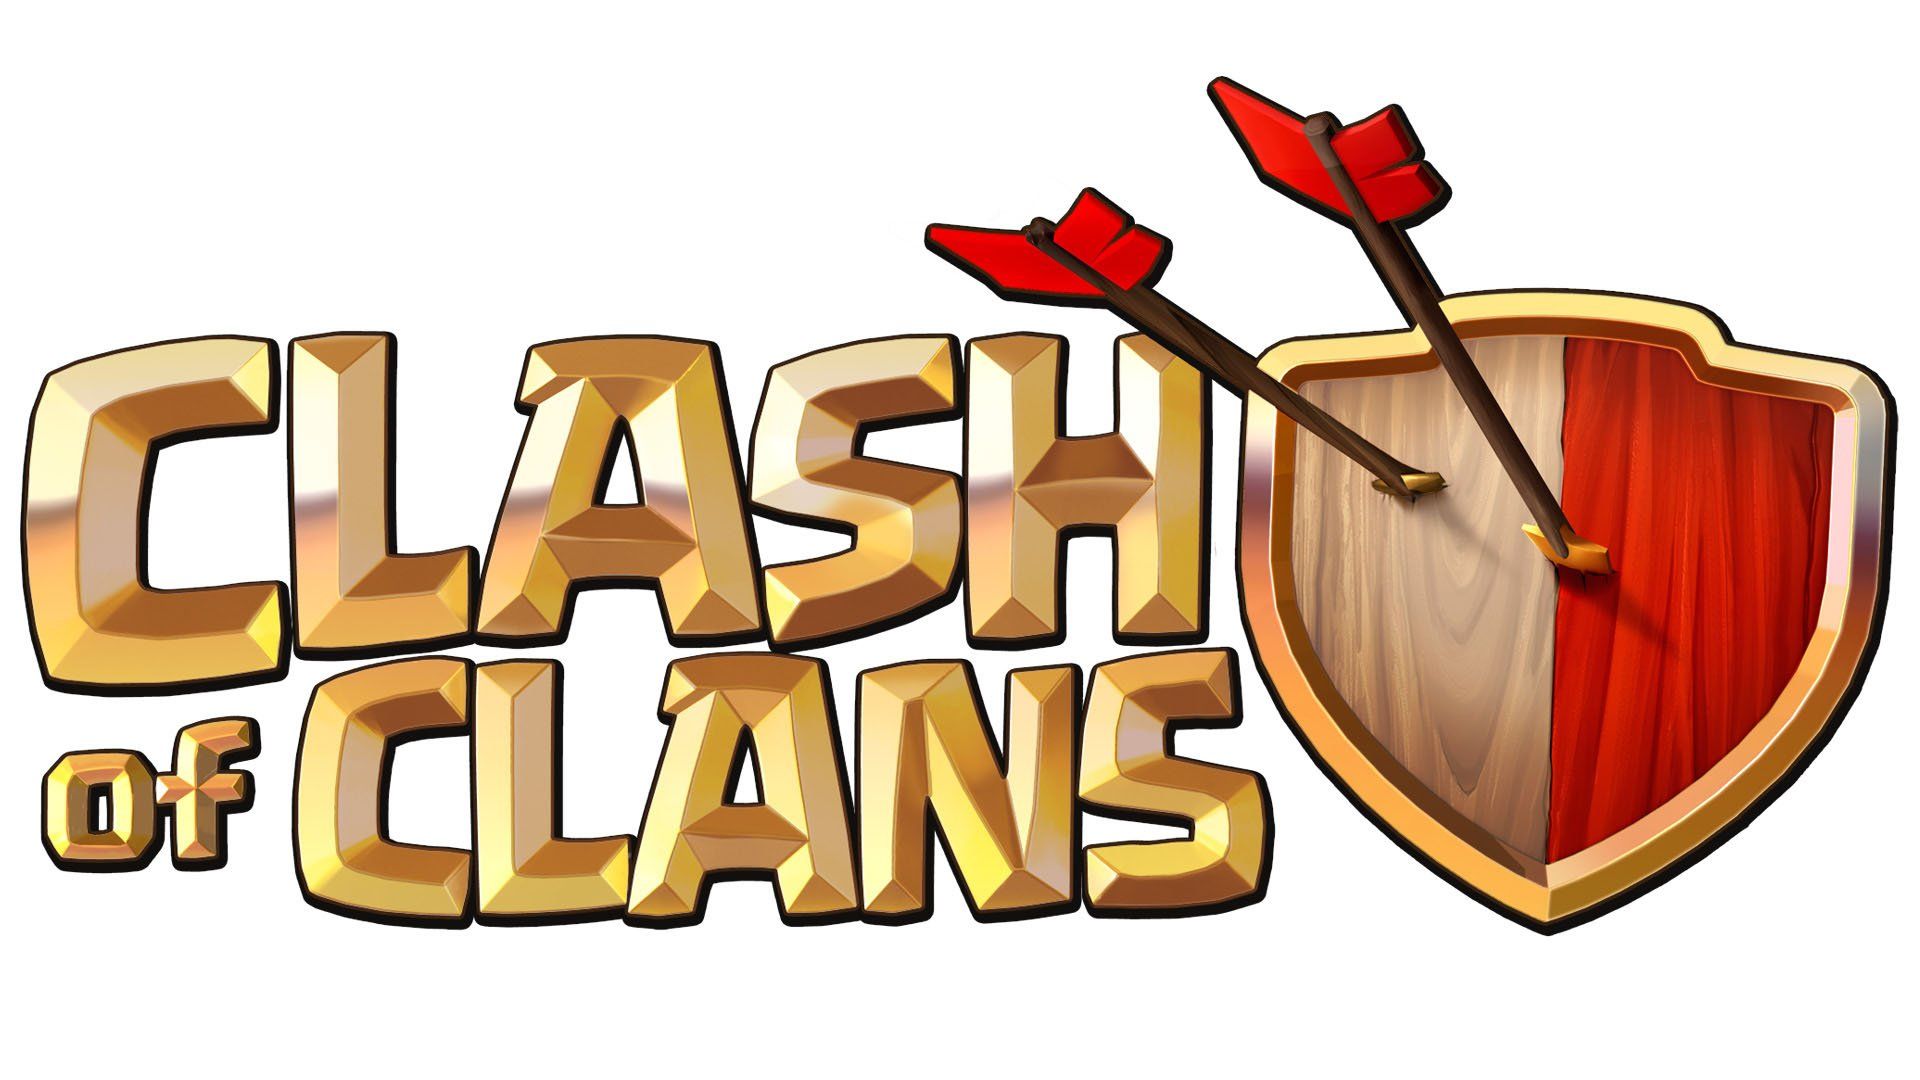 Clash of Clans Logo Wallpaper Free Clash of Clans Logo Background